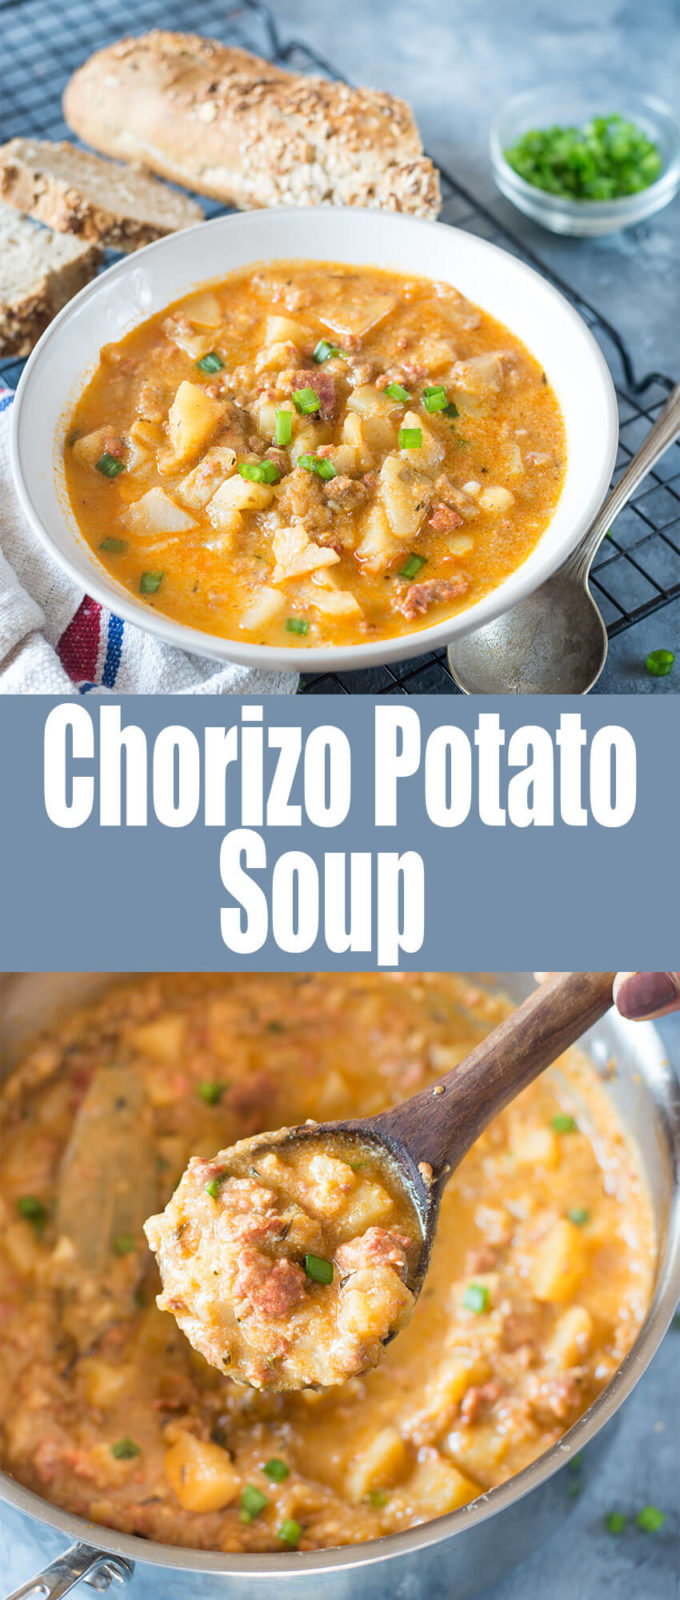 Chorizo and Potato Soup: This ultra-delicious, smokey and creamy Chorizo and potato soup is a bowl of goodness to warm your soul.